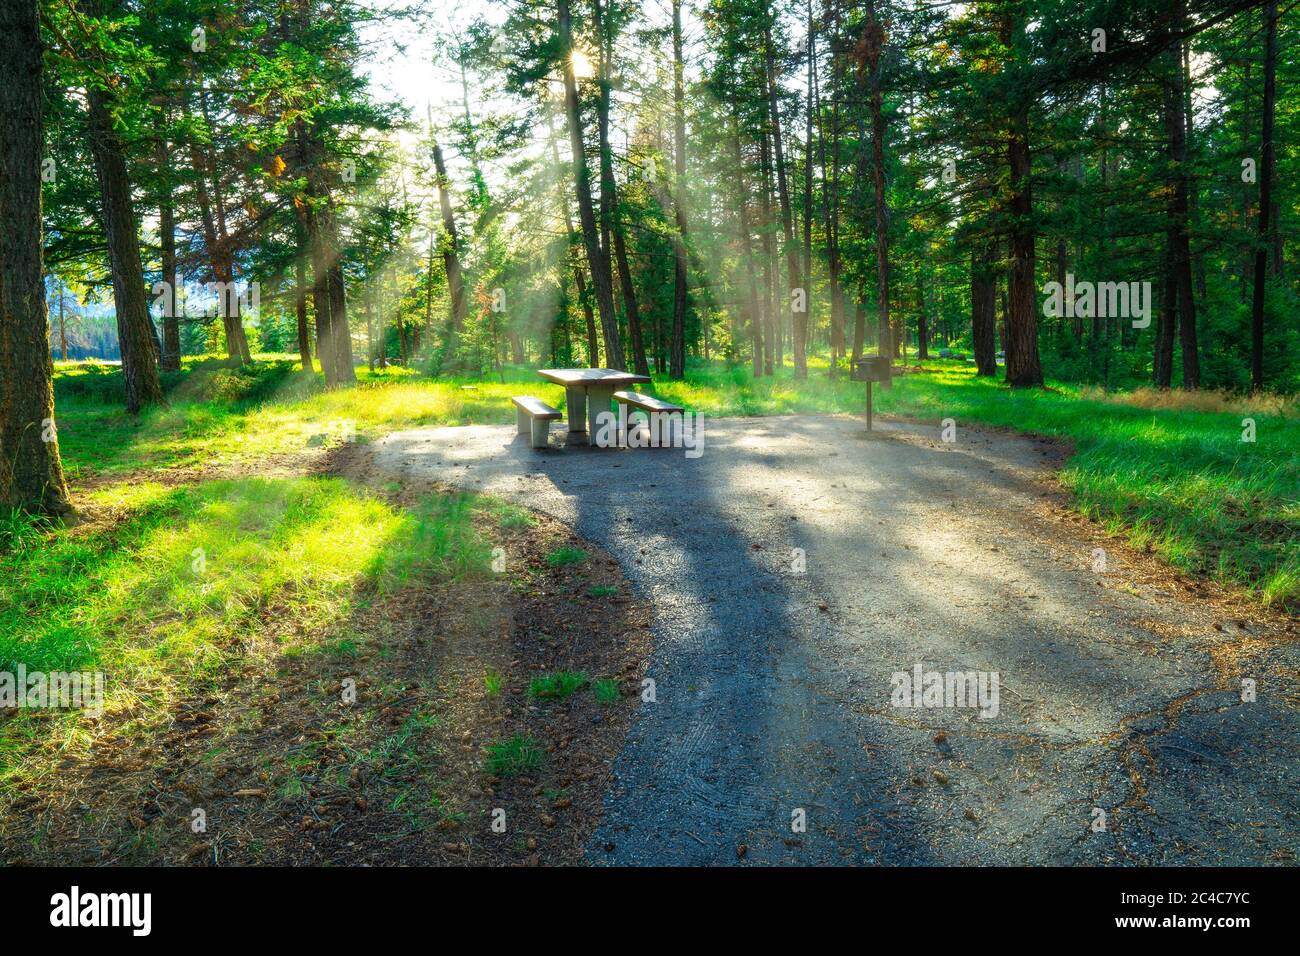 Picnic Table At Forest Park For RV Camping In Sun Rays Stock Photo